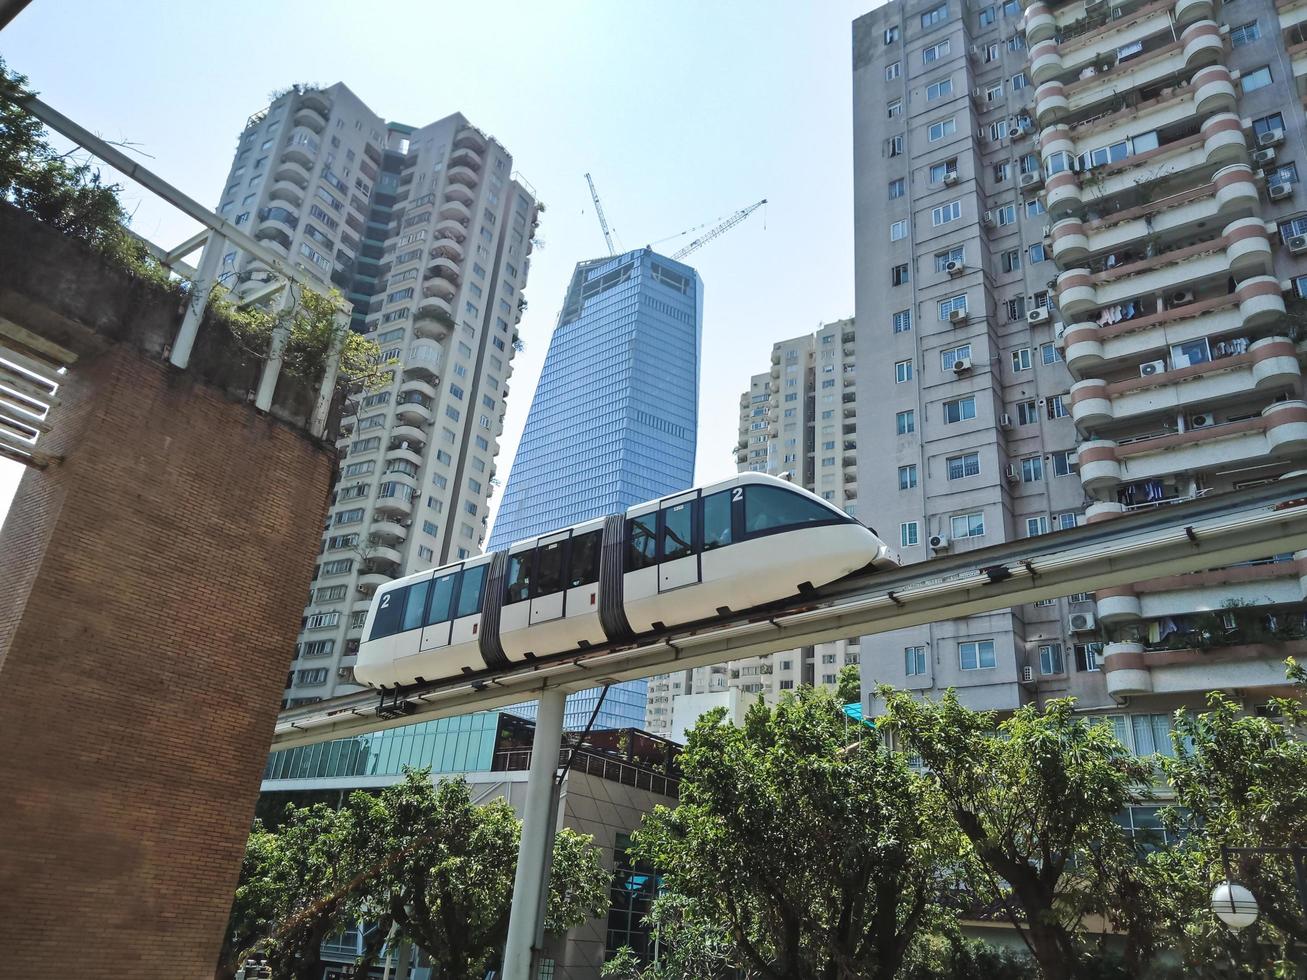 City train and buildings in Shenzhen city, China photo